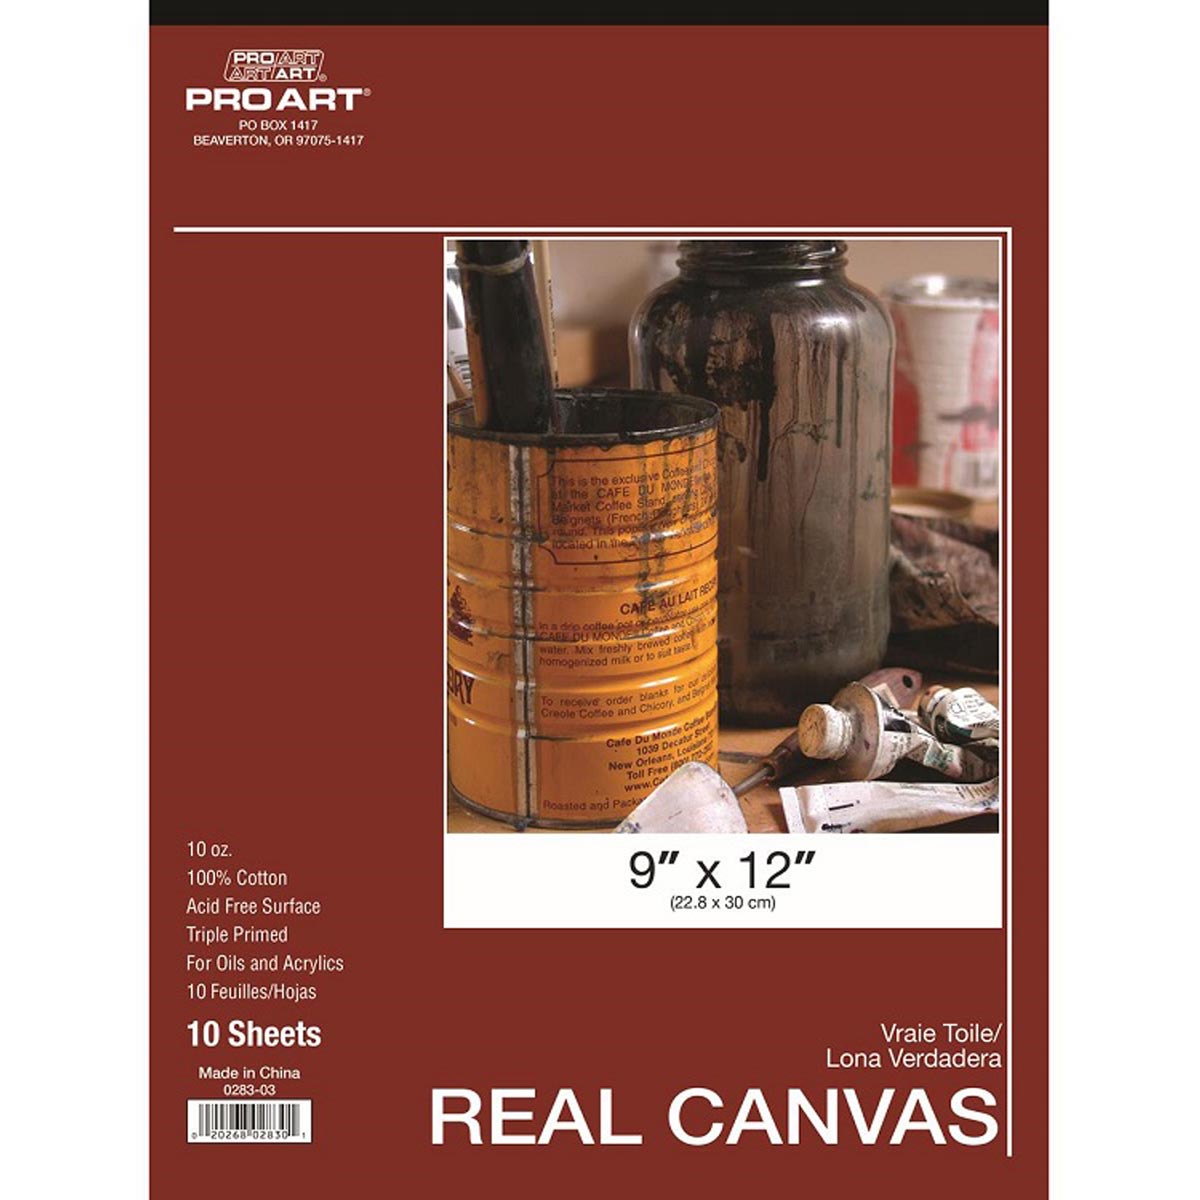 Pro Art Real Canvas 10 Sheet Pad - 9 x 12-inches